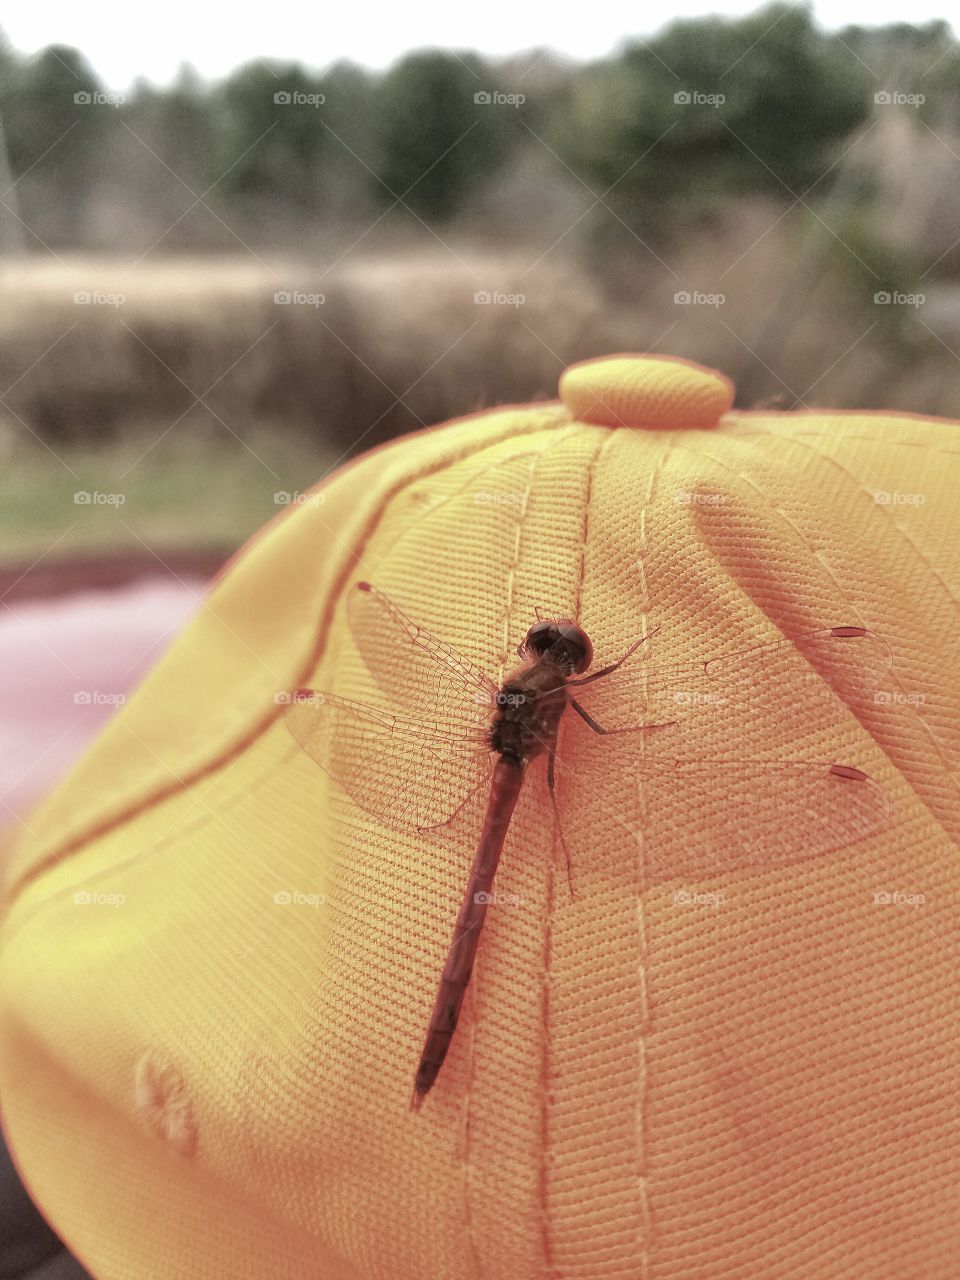 Dragonfly on hat